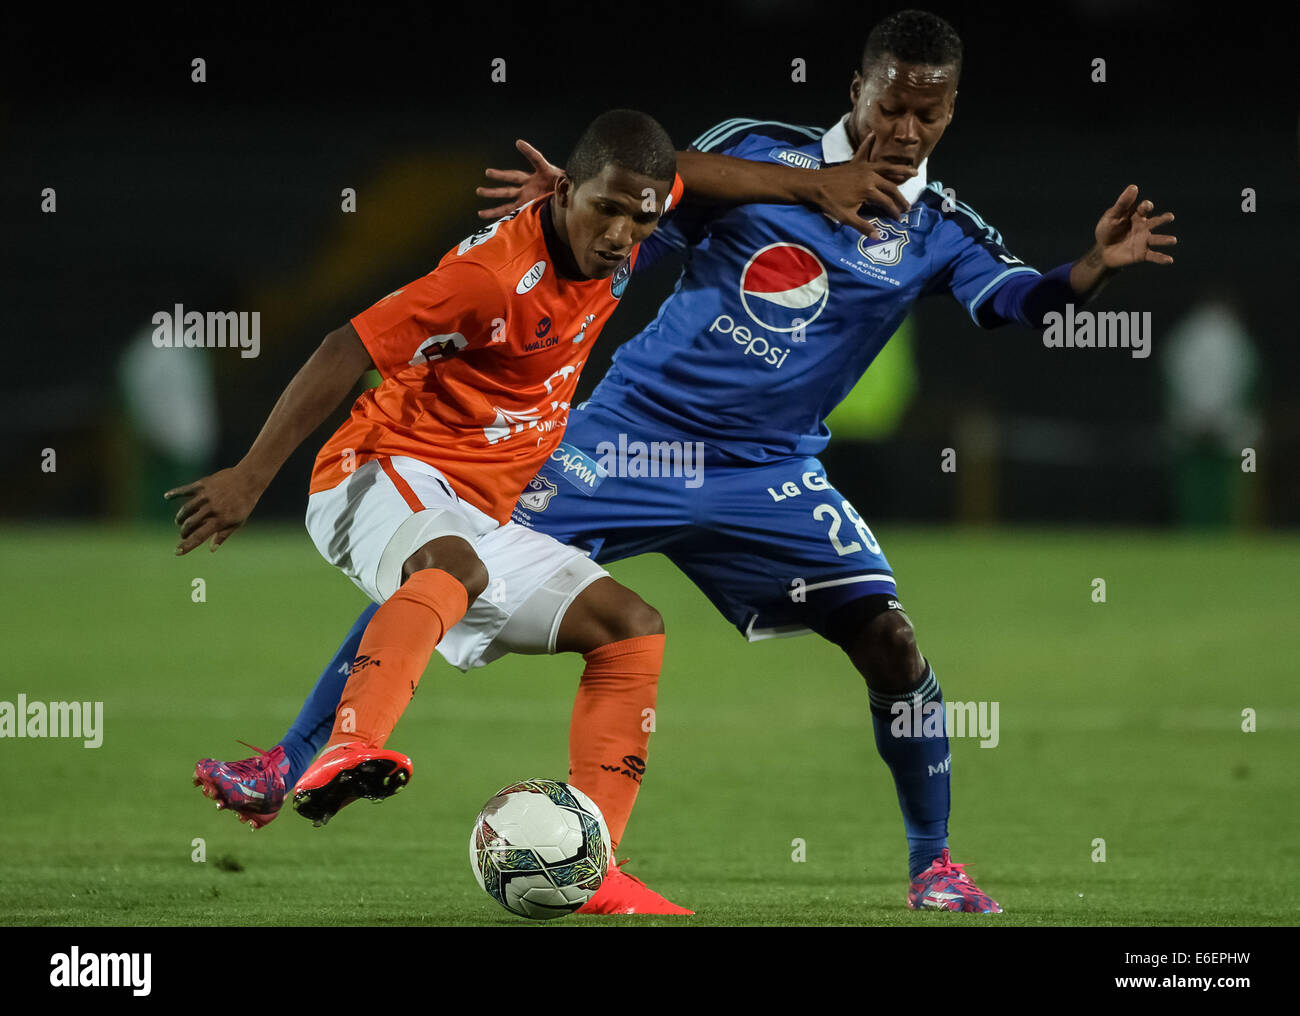 Bogota, Colombia. 21st Aug, 2014. Alex Diaz (R) of Millonarios of Colombia vies for the ball with Juan Morales (L) of Cesar Vallejo of Peru, during their match of the South American Cup, in Bogota, capital of Colombia, on Aug. 21, 2014. Credit:  Jhon Paz/Xinhua/Alamy Live News Stock Photo